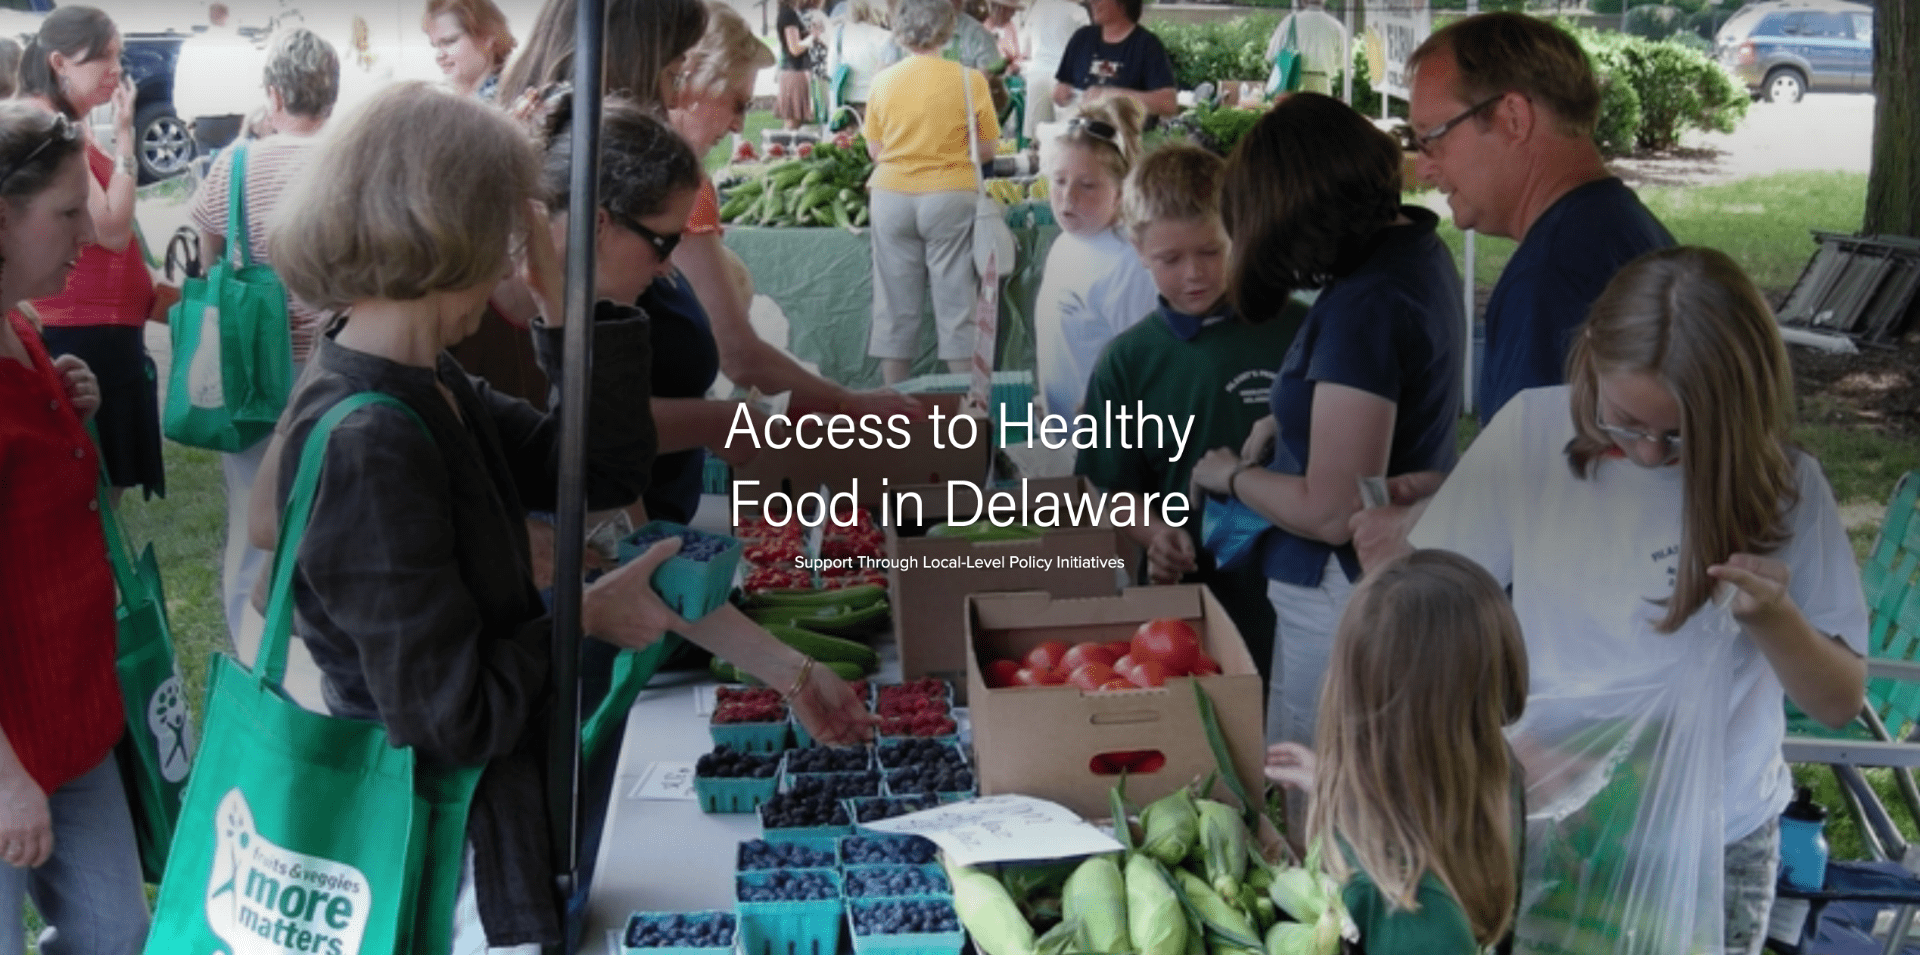 Access to Healthy Food in Delaware: Support Through Local-Level Policy Initiatives